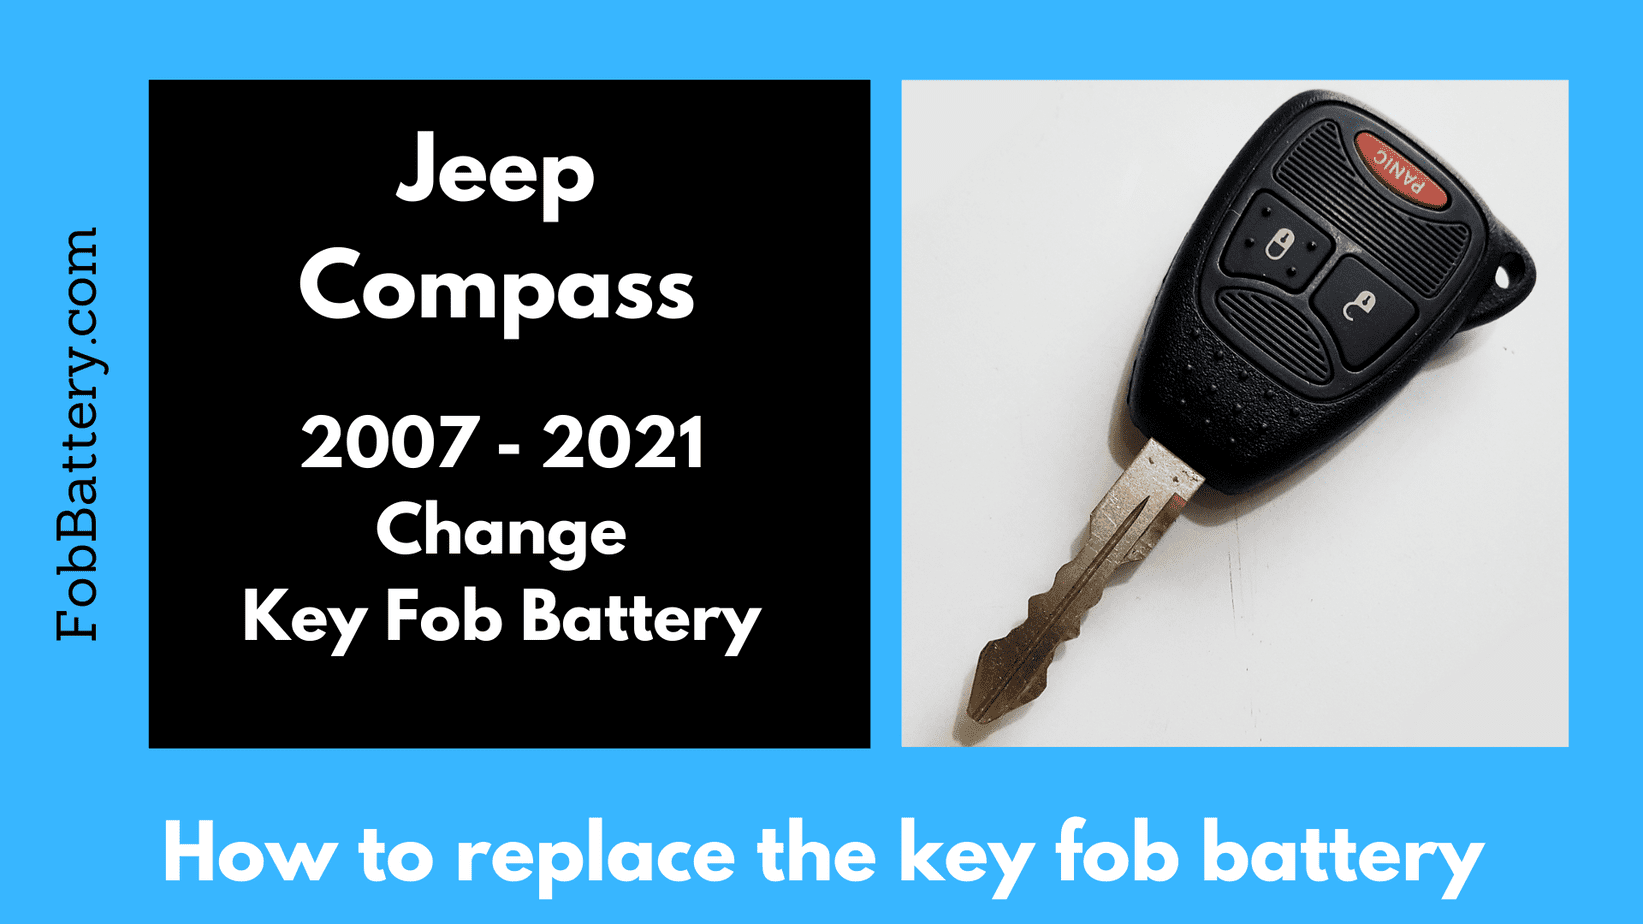 Jeep Compass key fob battery replacement